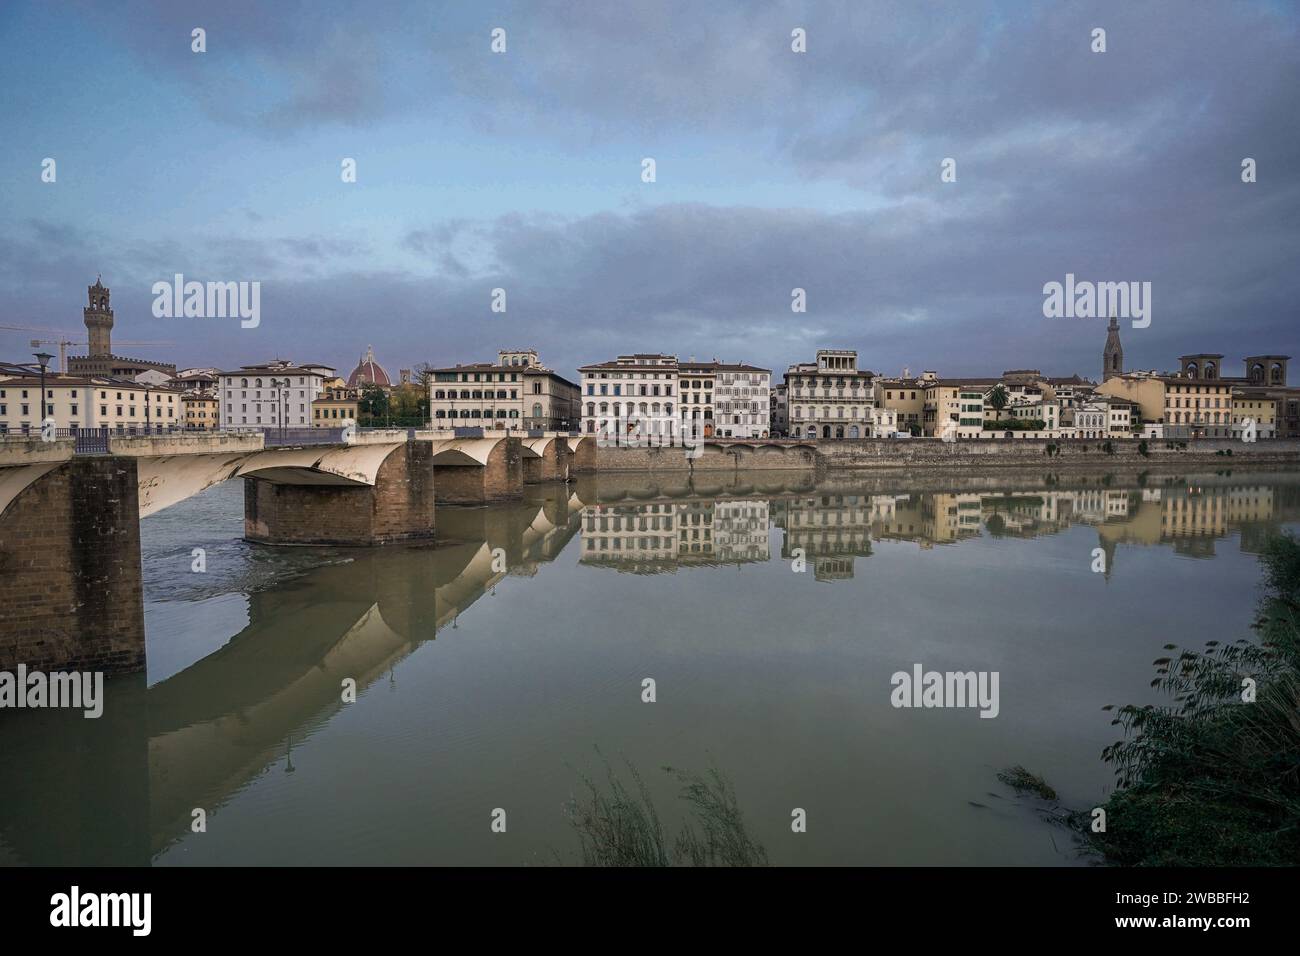 Arno river with bridges and surrounding buildings in Florence, Italy Stock Photo